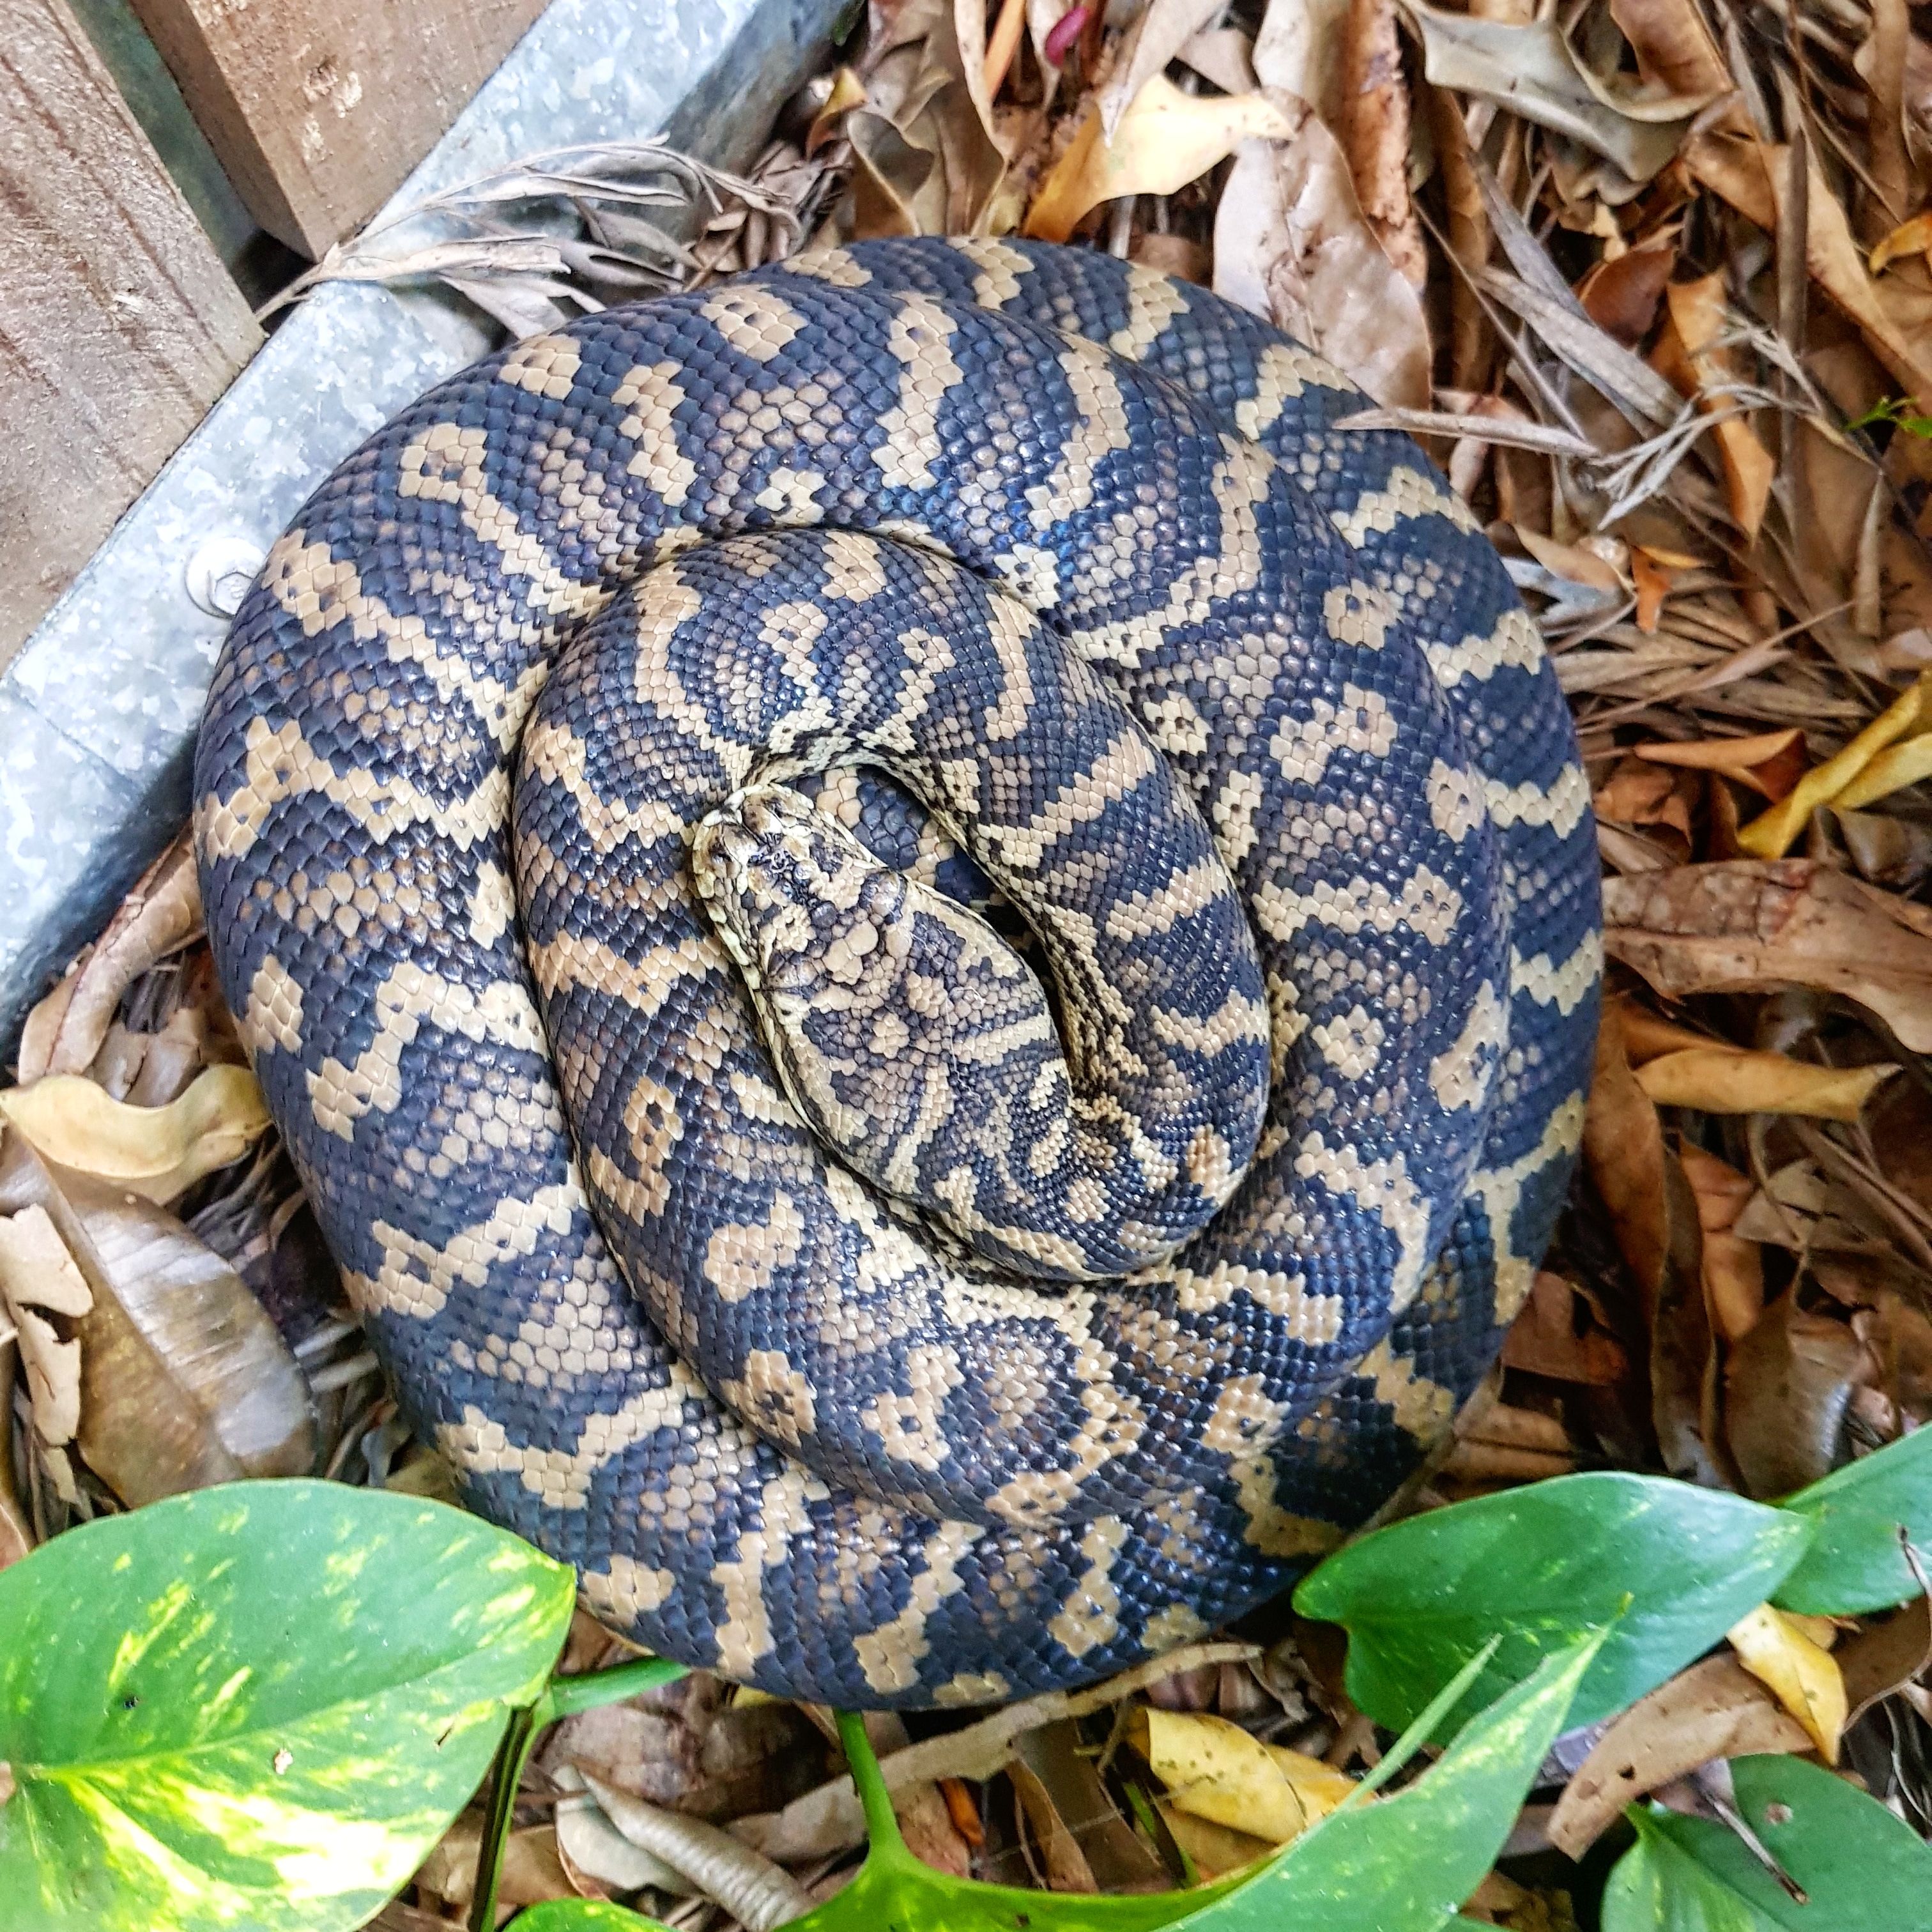 snake curled up on leaves by fence